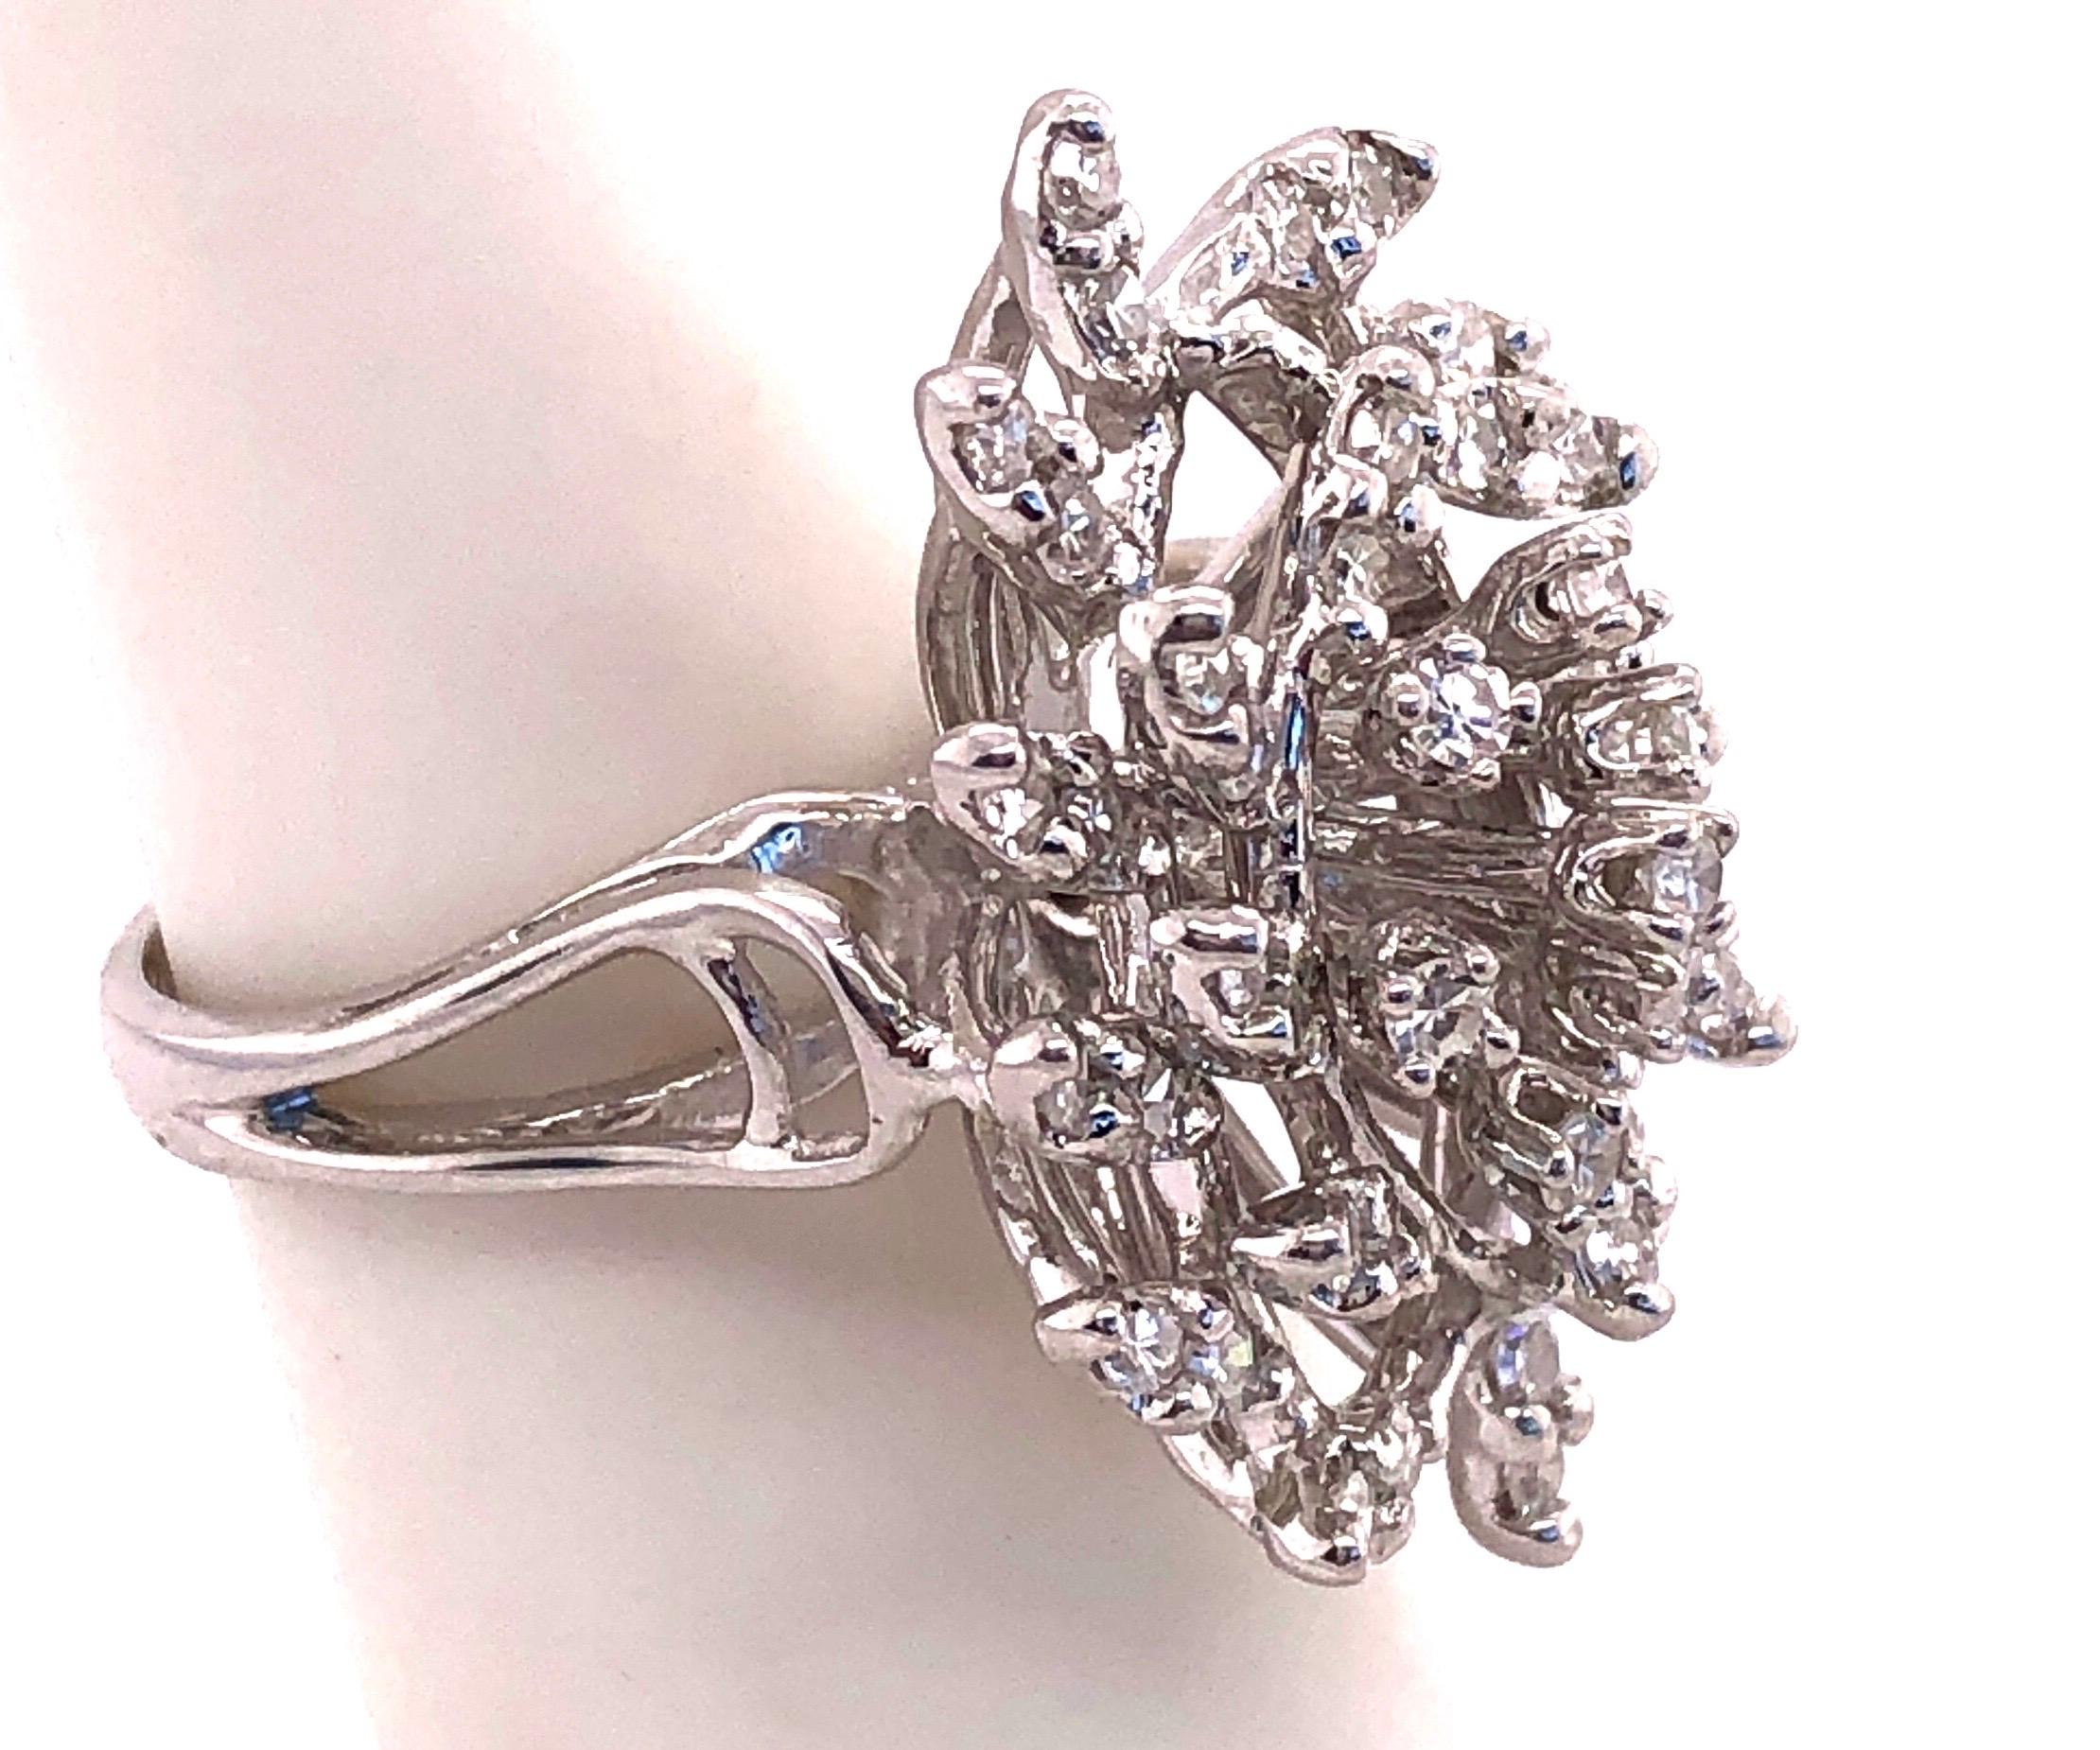 14Kt White Gold Contemporary Ring 2.30 Total Diamond Weight.
Size 5.5 
9.60 grams total weight.